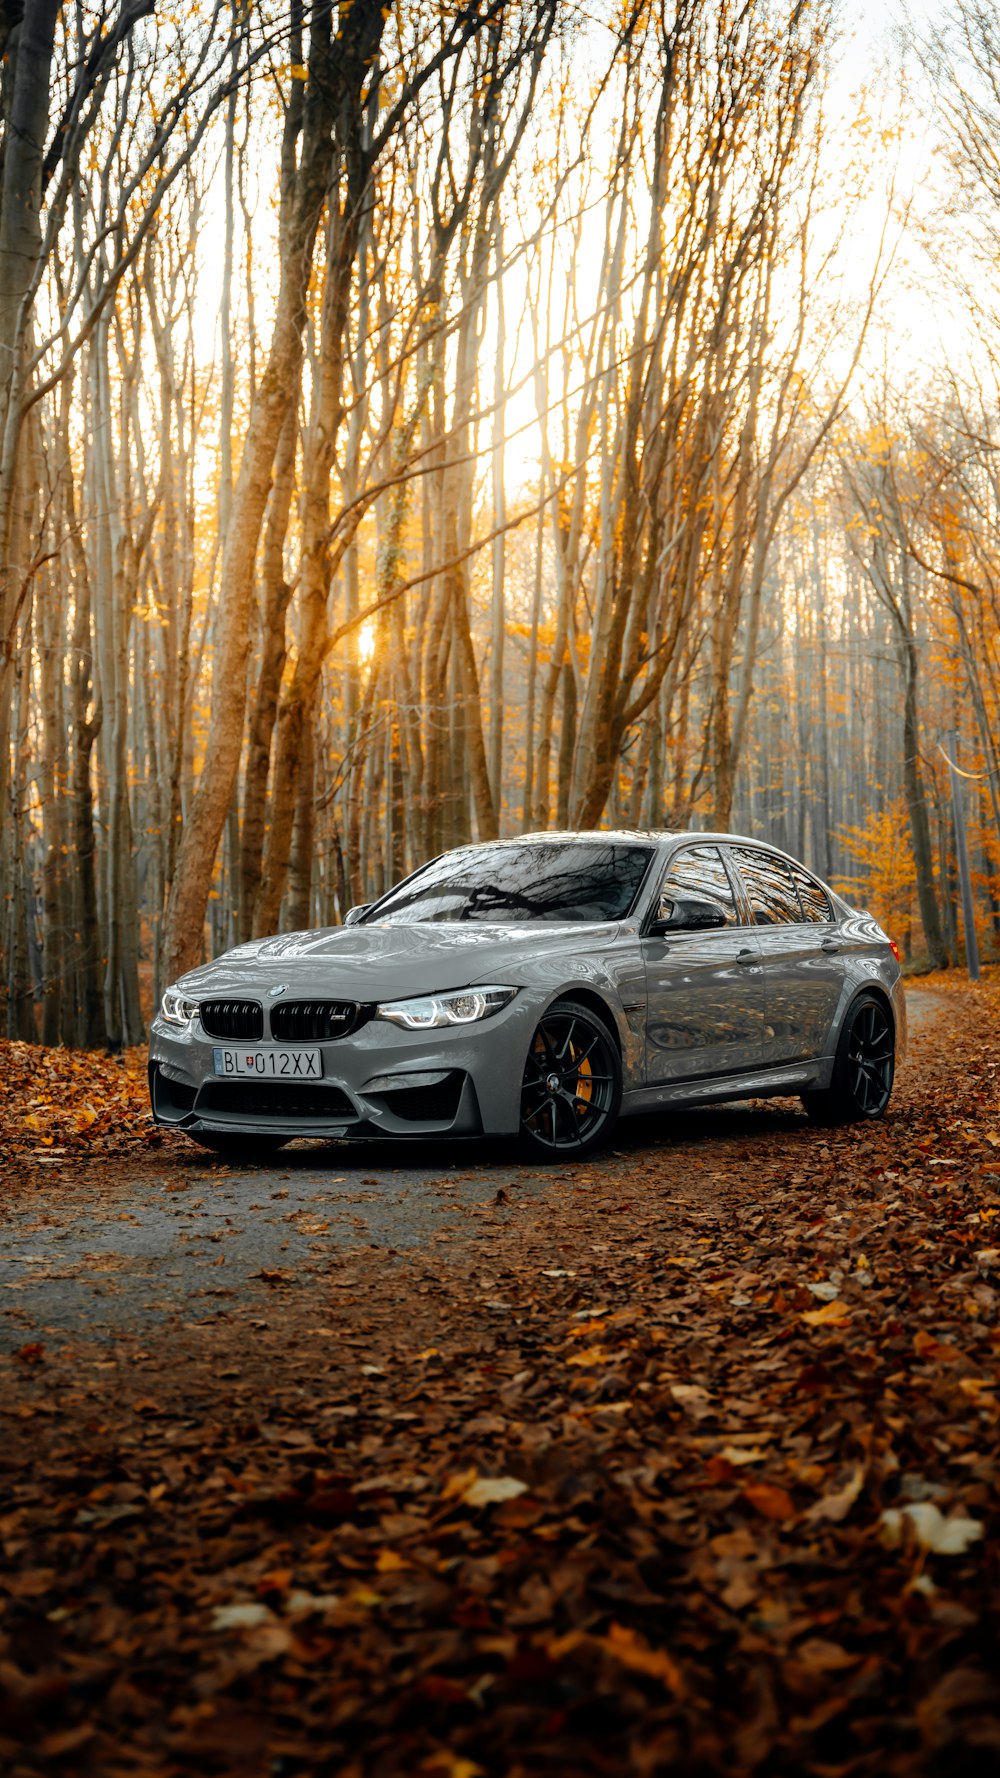 Car In Forest Pictures Download Free Images On Unsplash